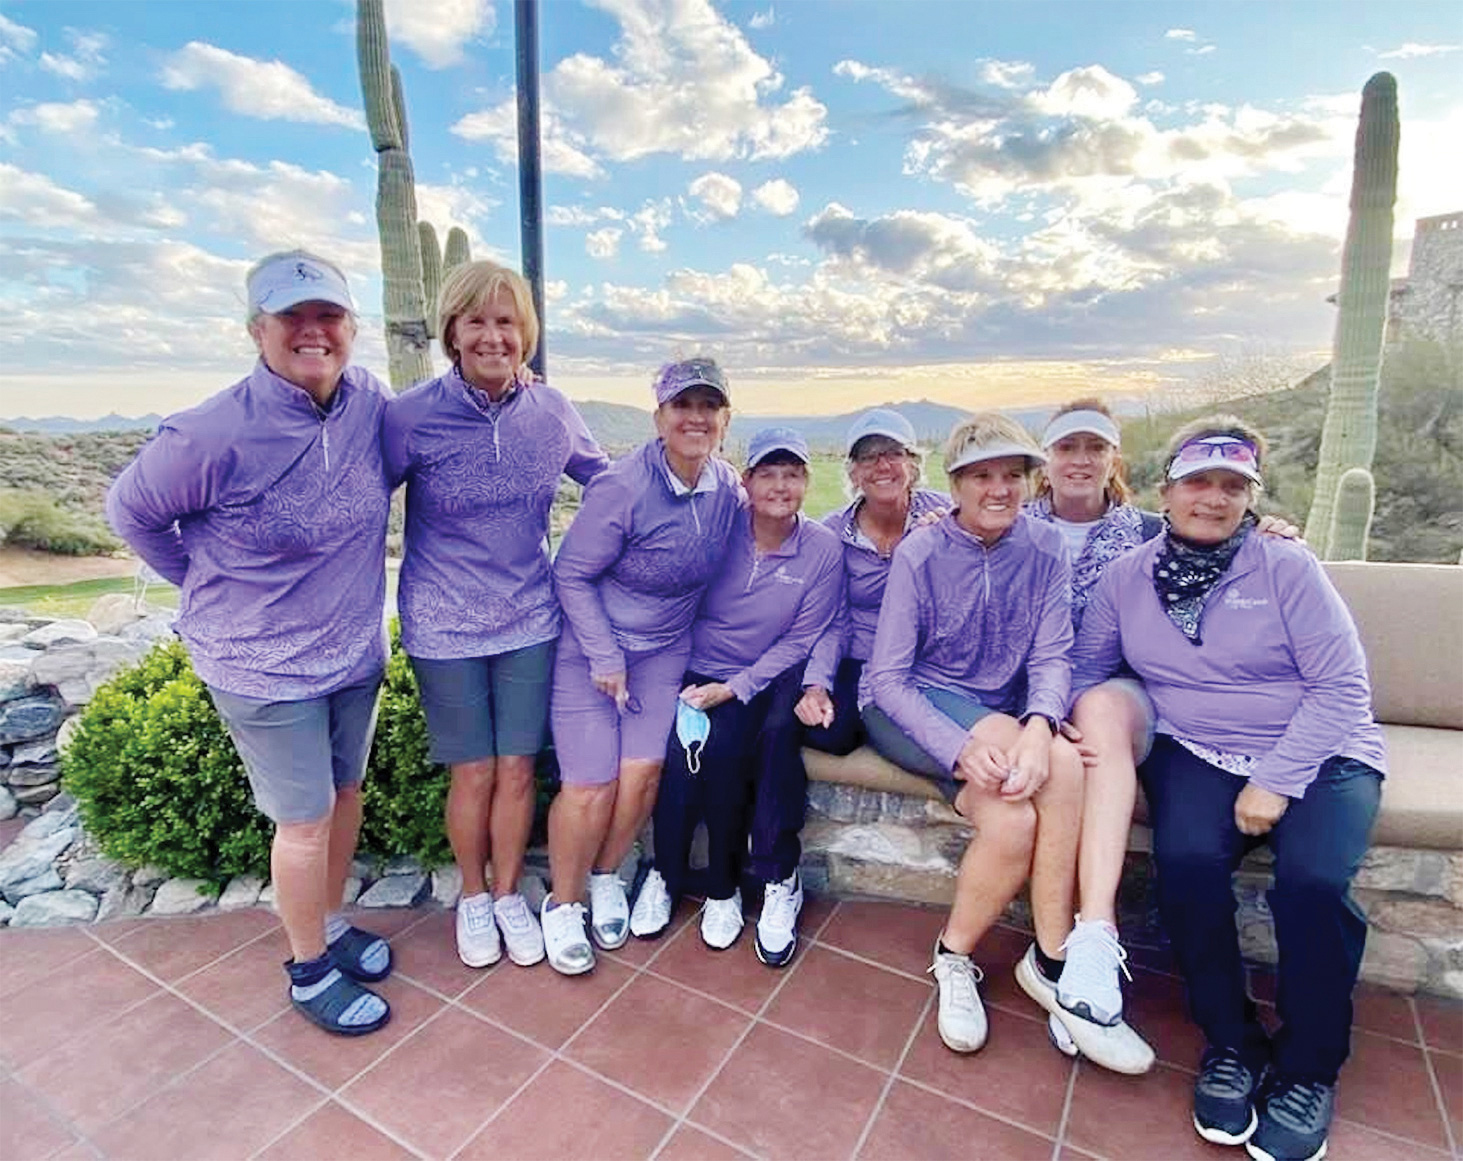 Final match at Desert Mountain’s Chiricahua Course (left to right): Ellen Enright, Mary Harris, Cindy Sota, Sheri Sears, Susan Slaughter, Sharon Hadley, Monica Lee, and Andrea Dilger